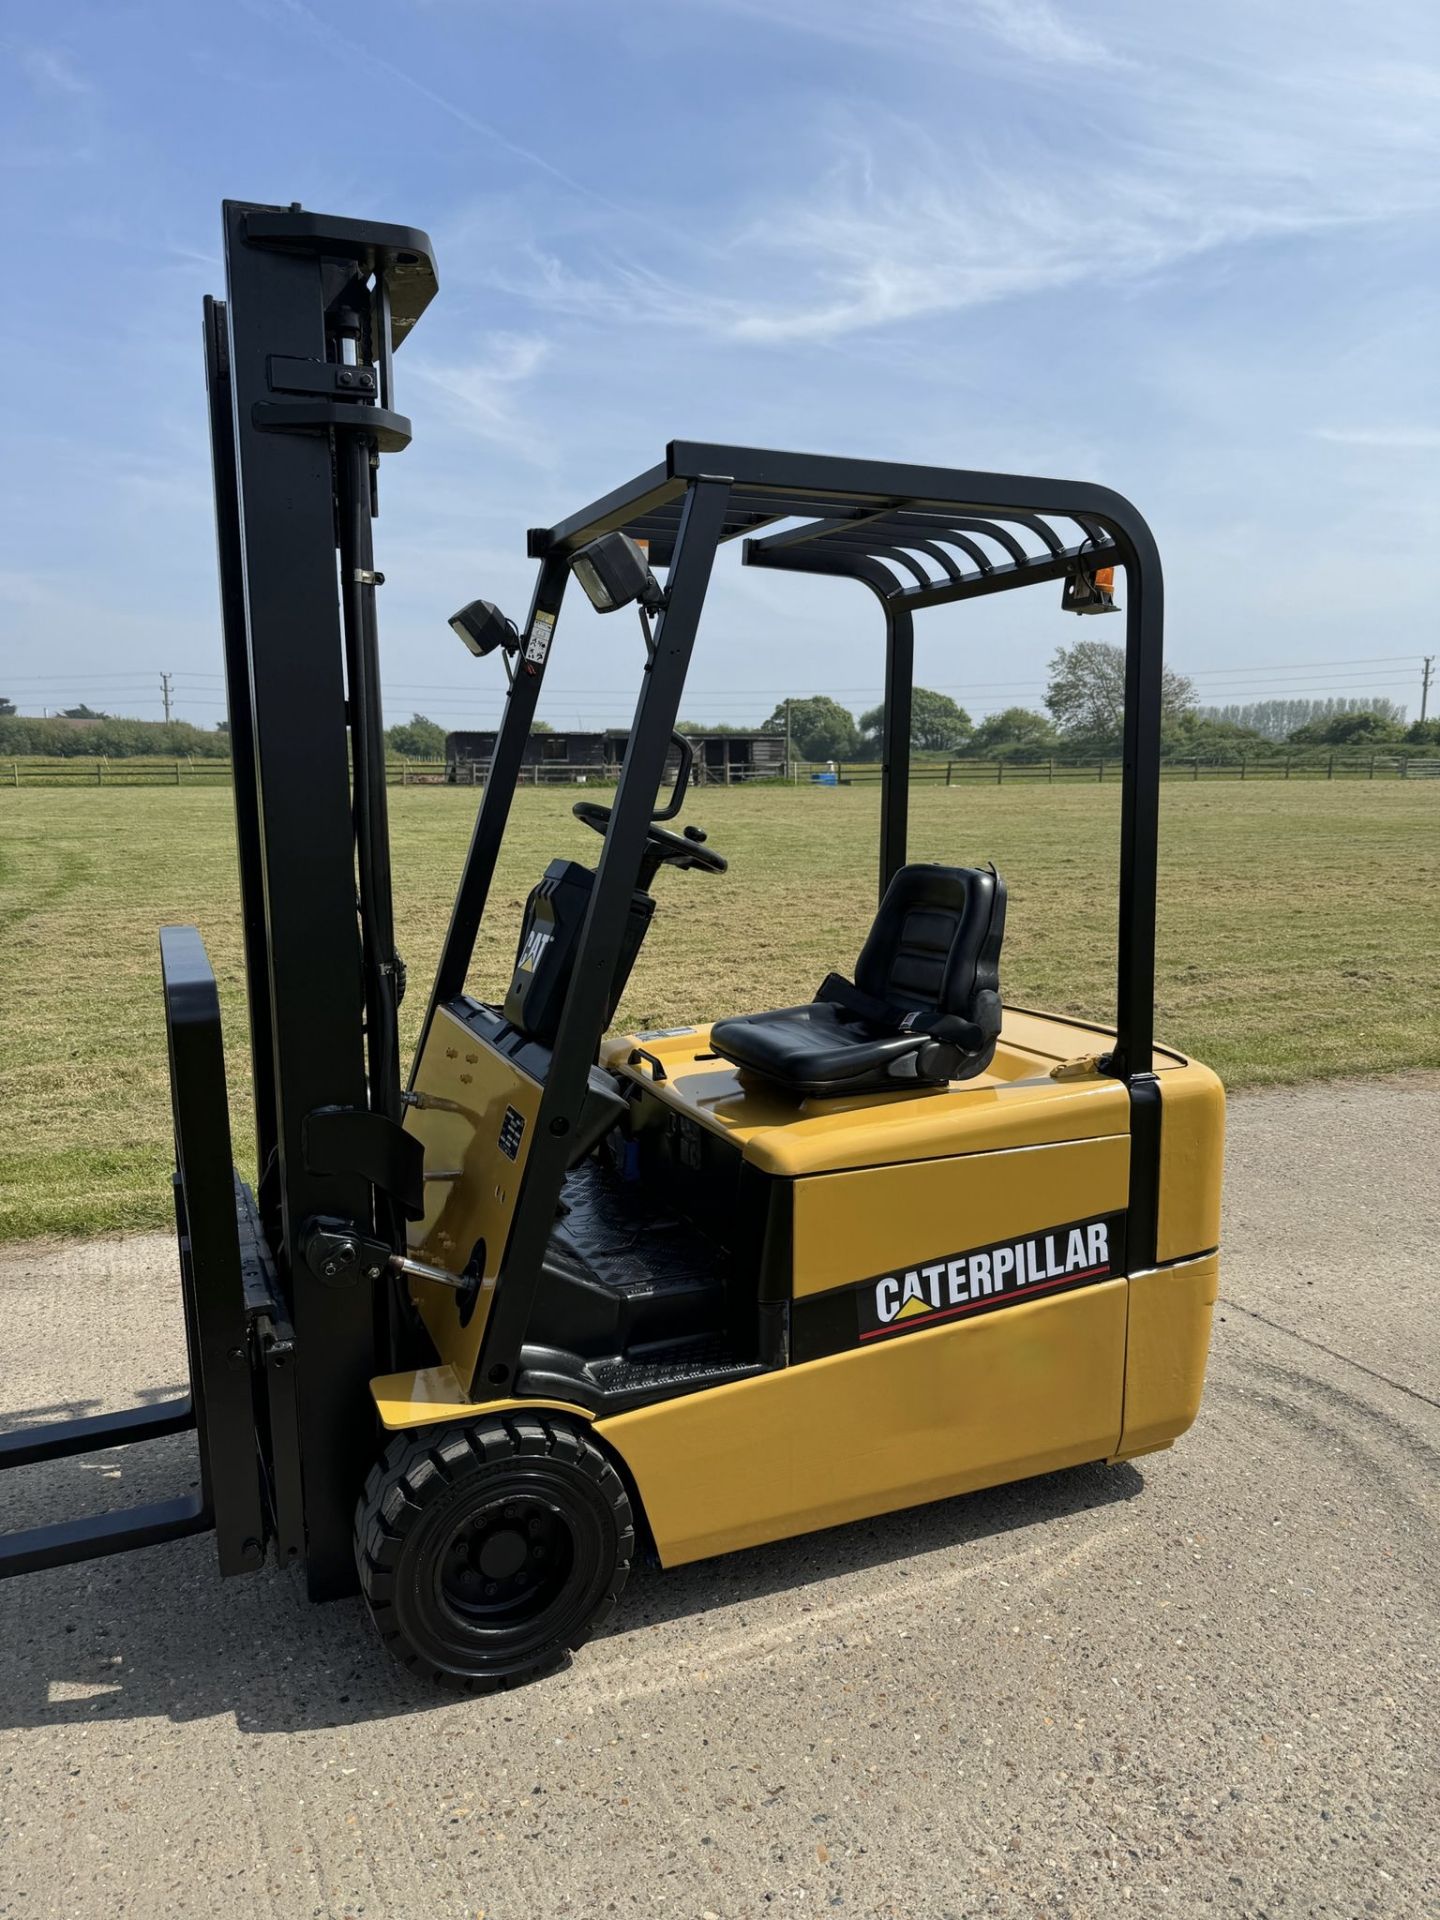 CATERPILLAR, 2 Tonne Electric Forklift Truck - Image 5 of 5